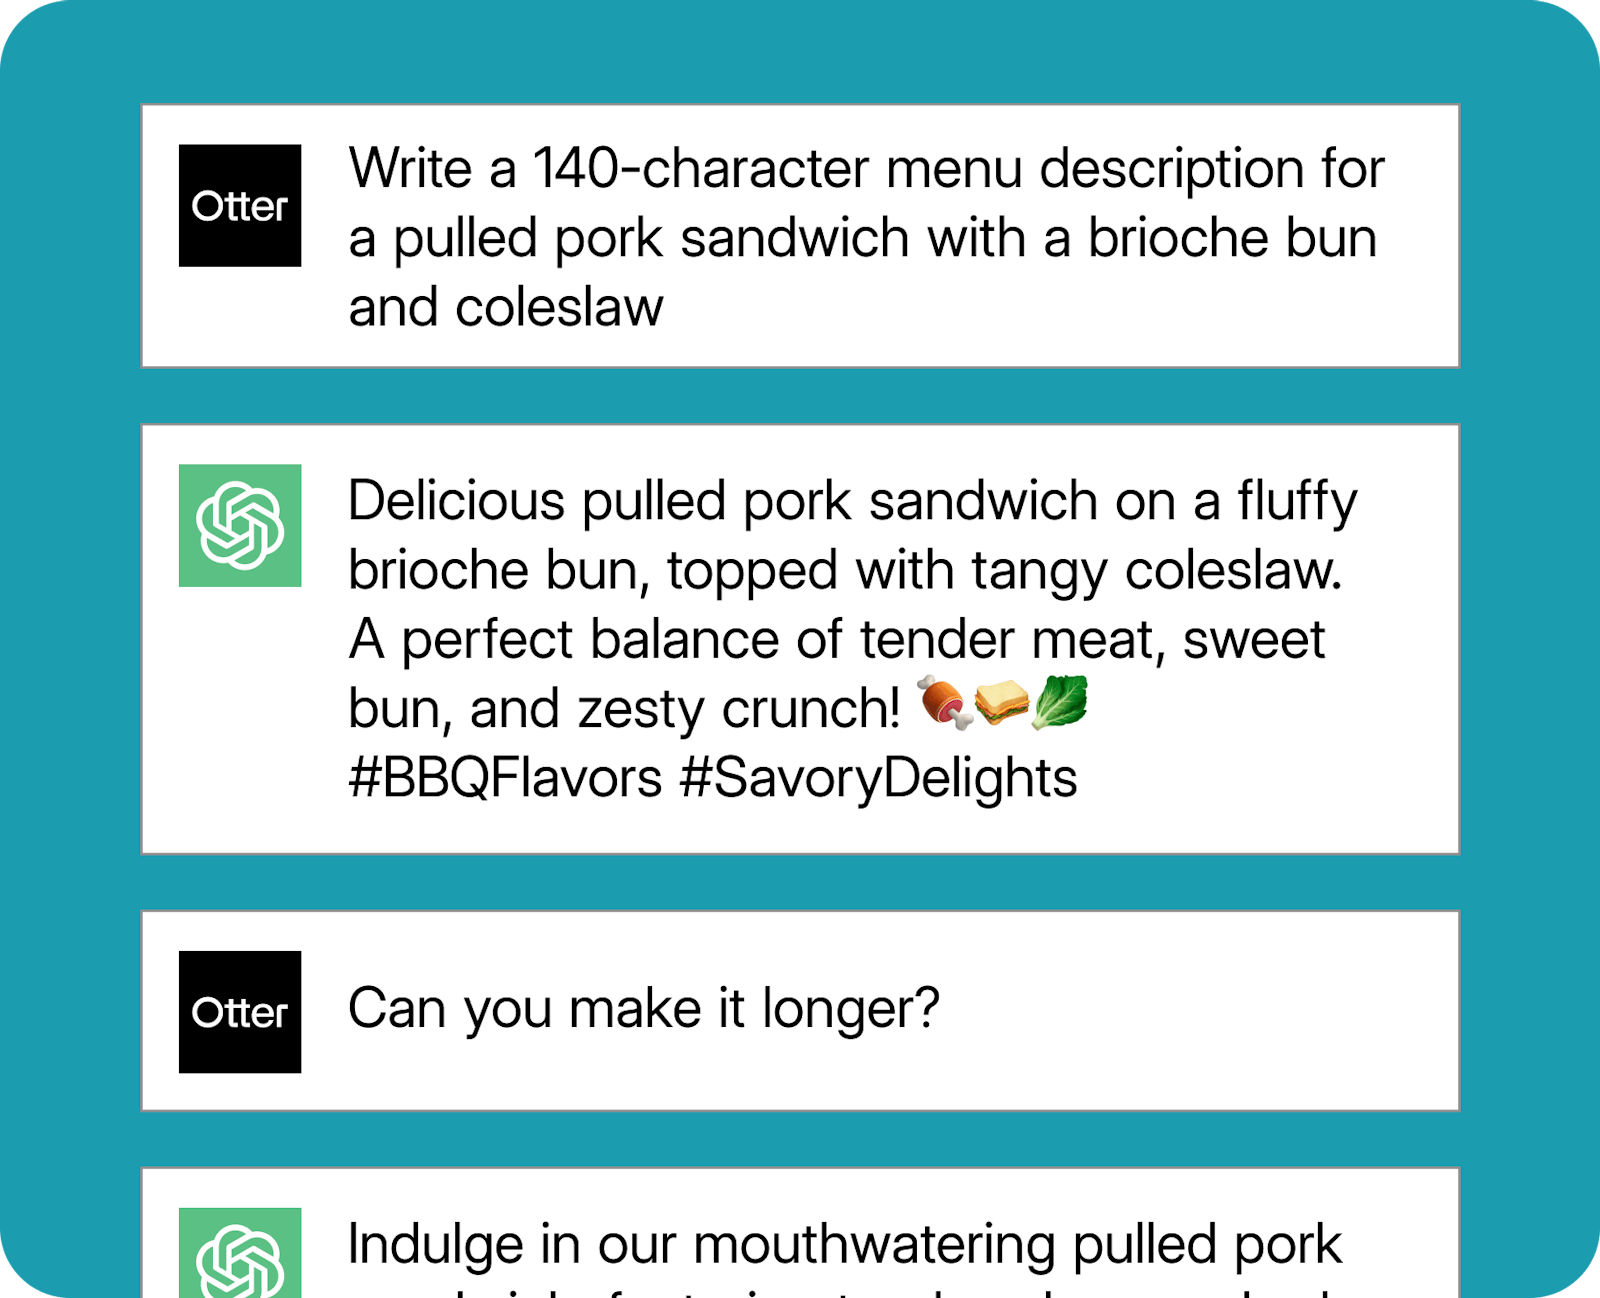 An example ChatGPT prompt for restaurant menu item updates.